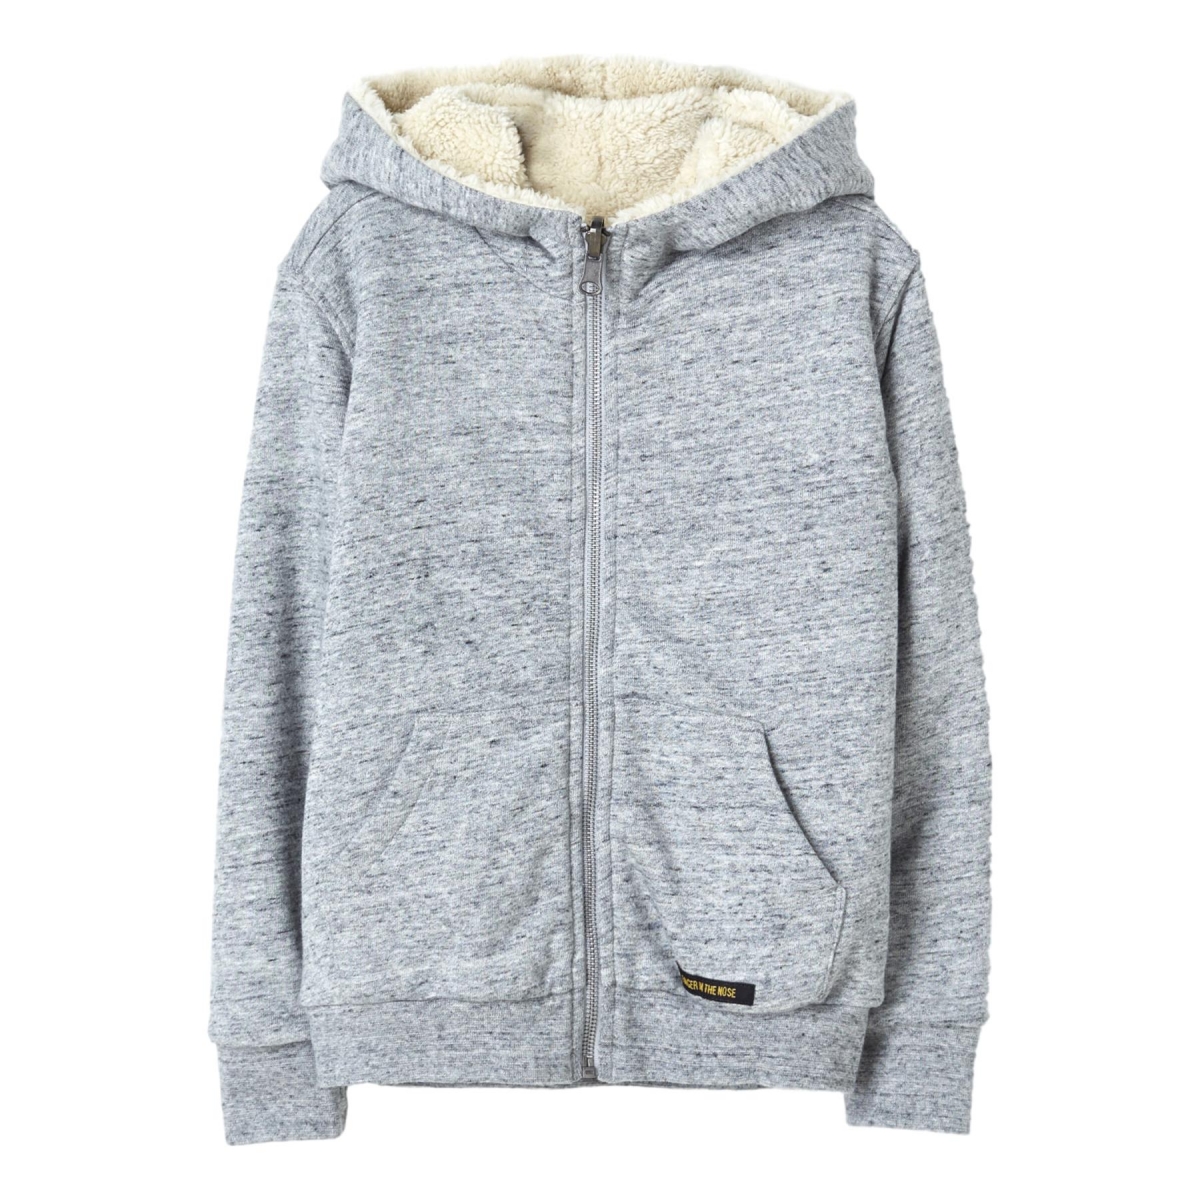 Finger in the nose Hopper Zip Knitted Hoodie gray 211-0860-080 